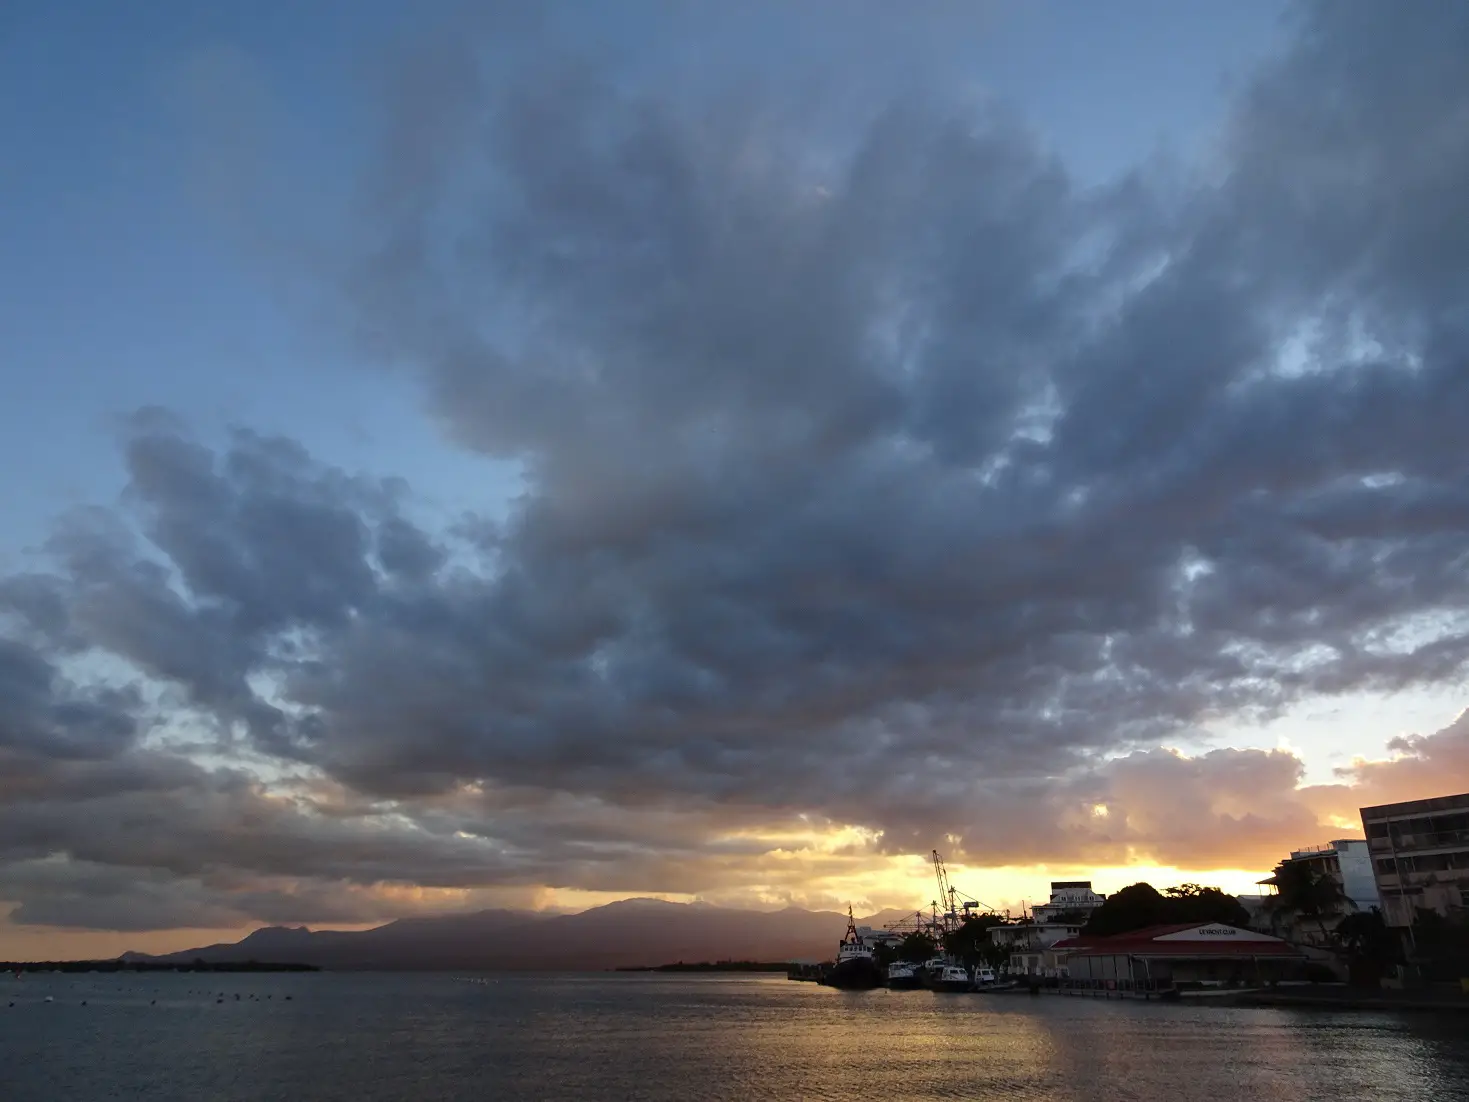 A view of Roseau Port on Dominica at dusk